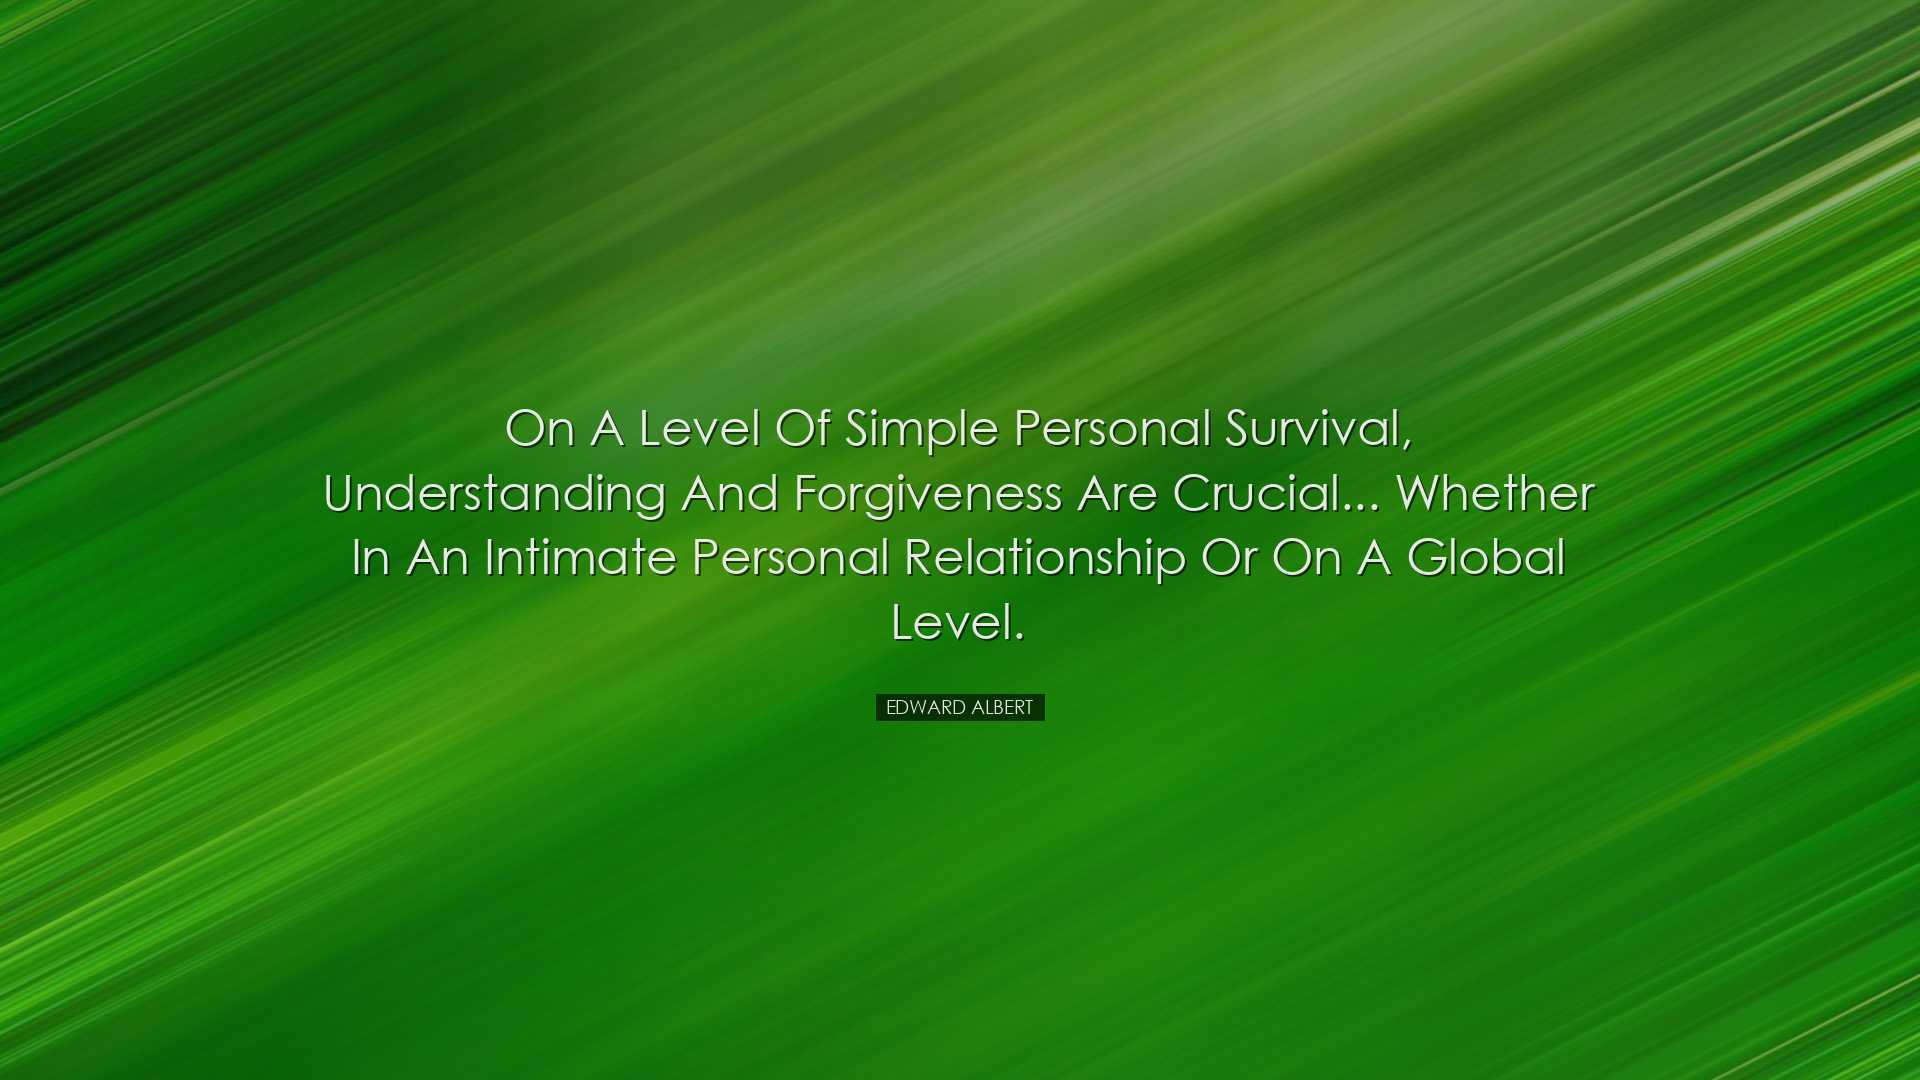 On a level of simple personal survival, understanding and forgiven